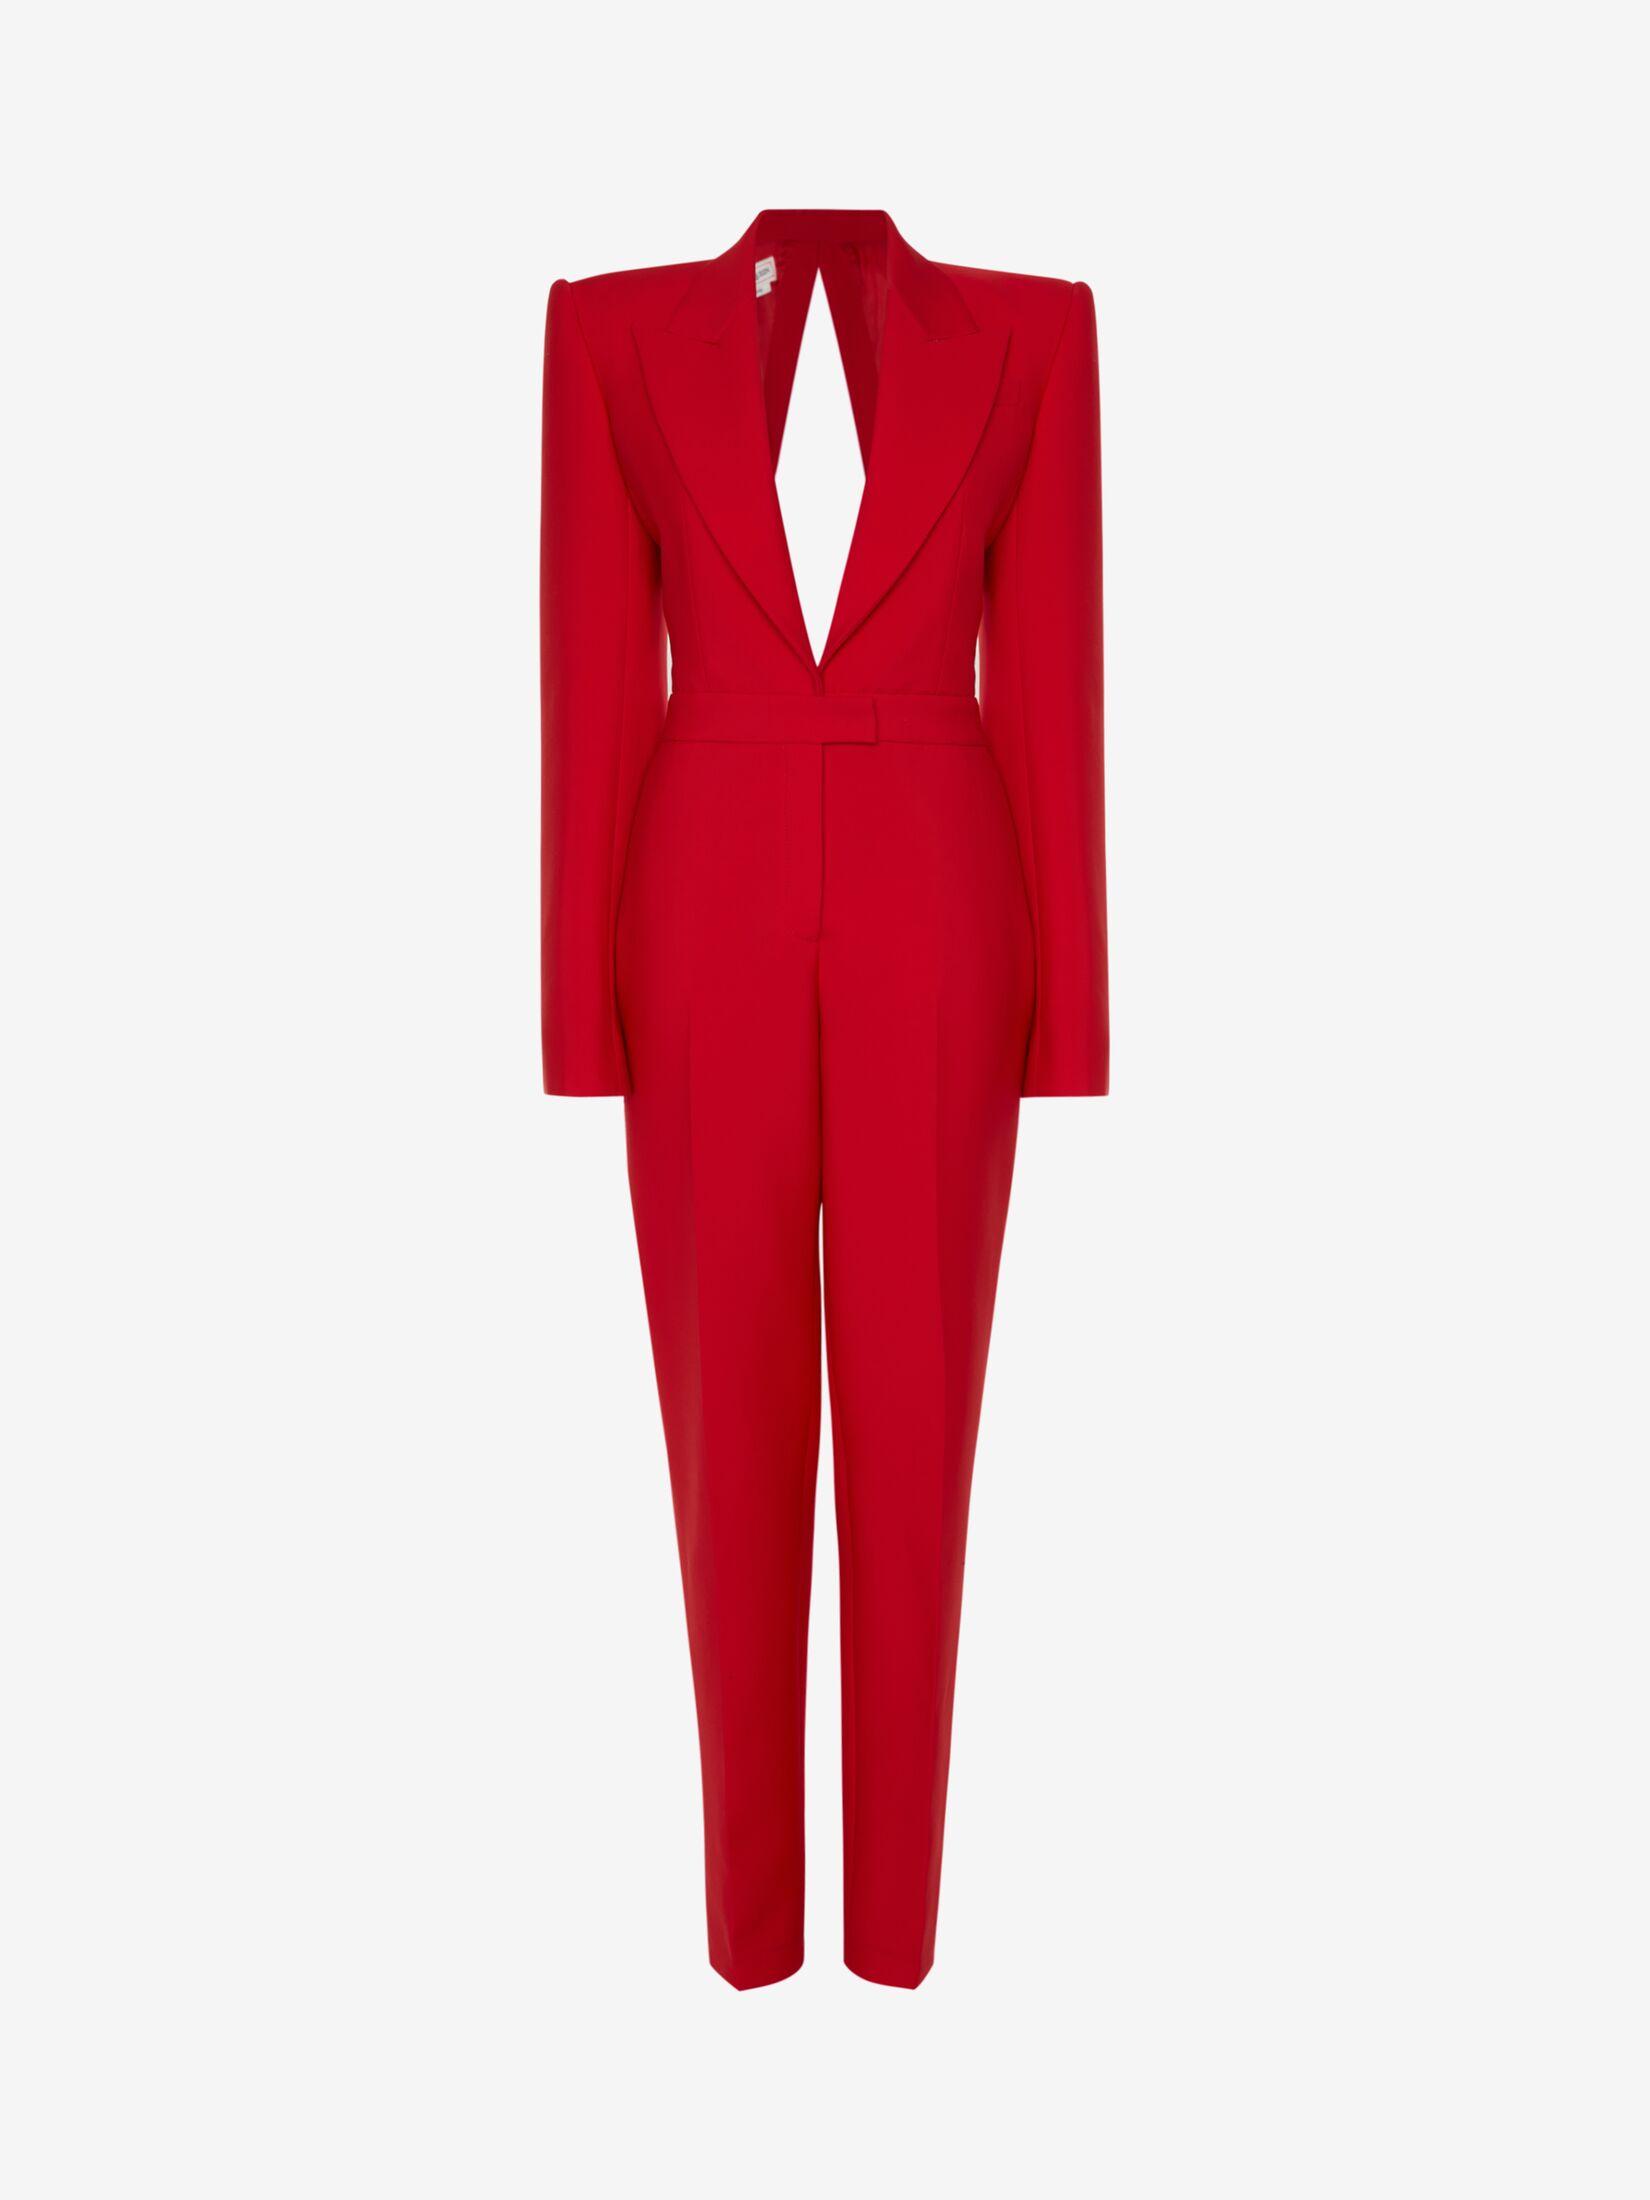 Alexander McQueen Red All-in-one Tailored Suit | Lyst